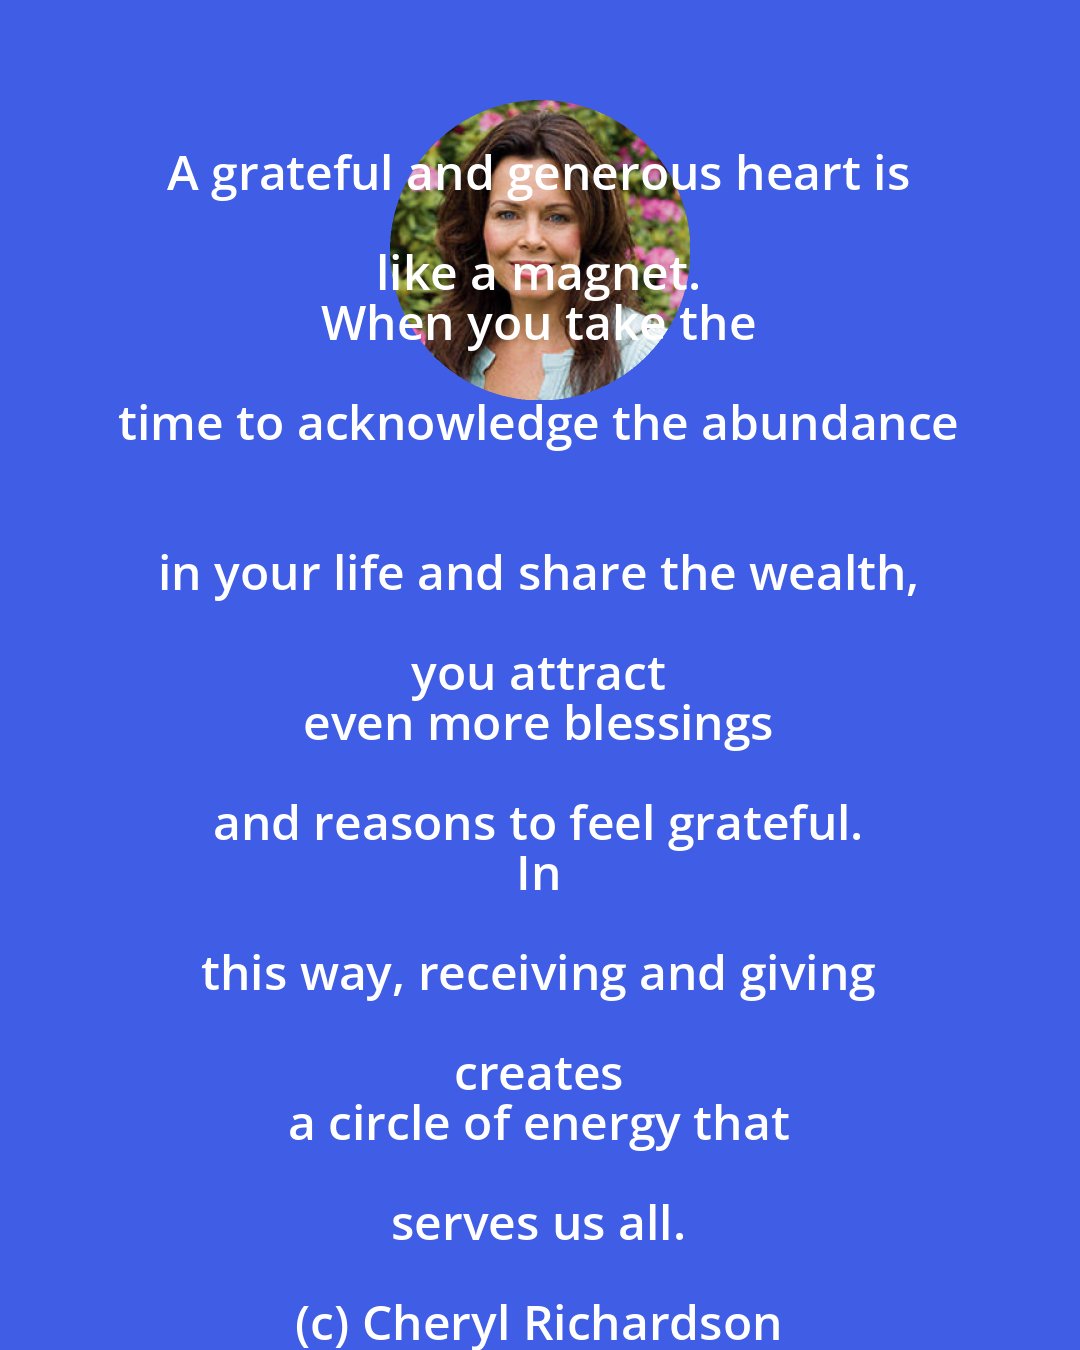 Cheryl Richardson: A grateful and generous heart is like a magnet. 
 When you take the time to acknowledge the abundance 
 in your life and share the wealth, you attract 
 even more blessings and reasons to feel grateful. 
 In this way, receiving and giving creates 
 a circle of energy that serves us all.